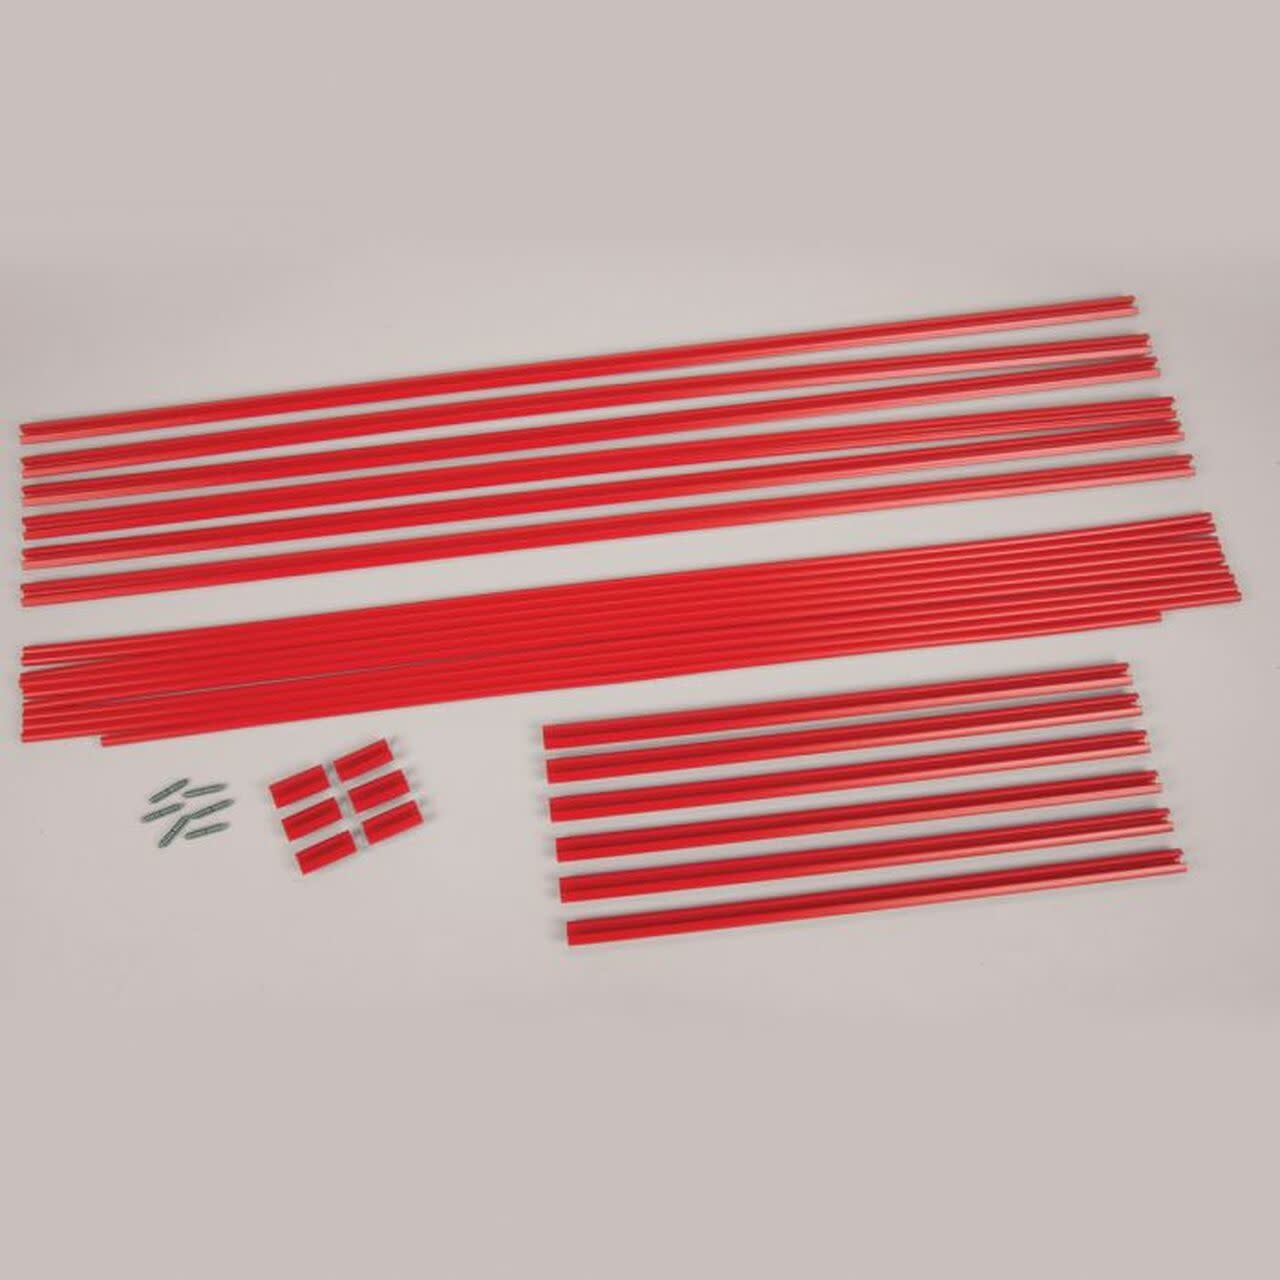 Red Snappers Quilt Loading System - 762876914170